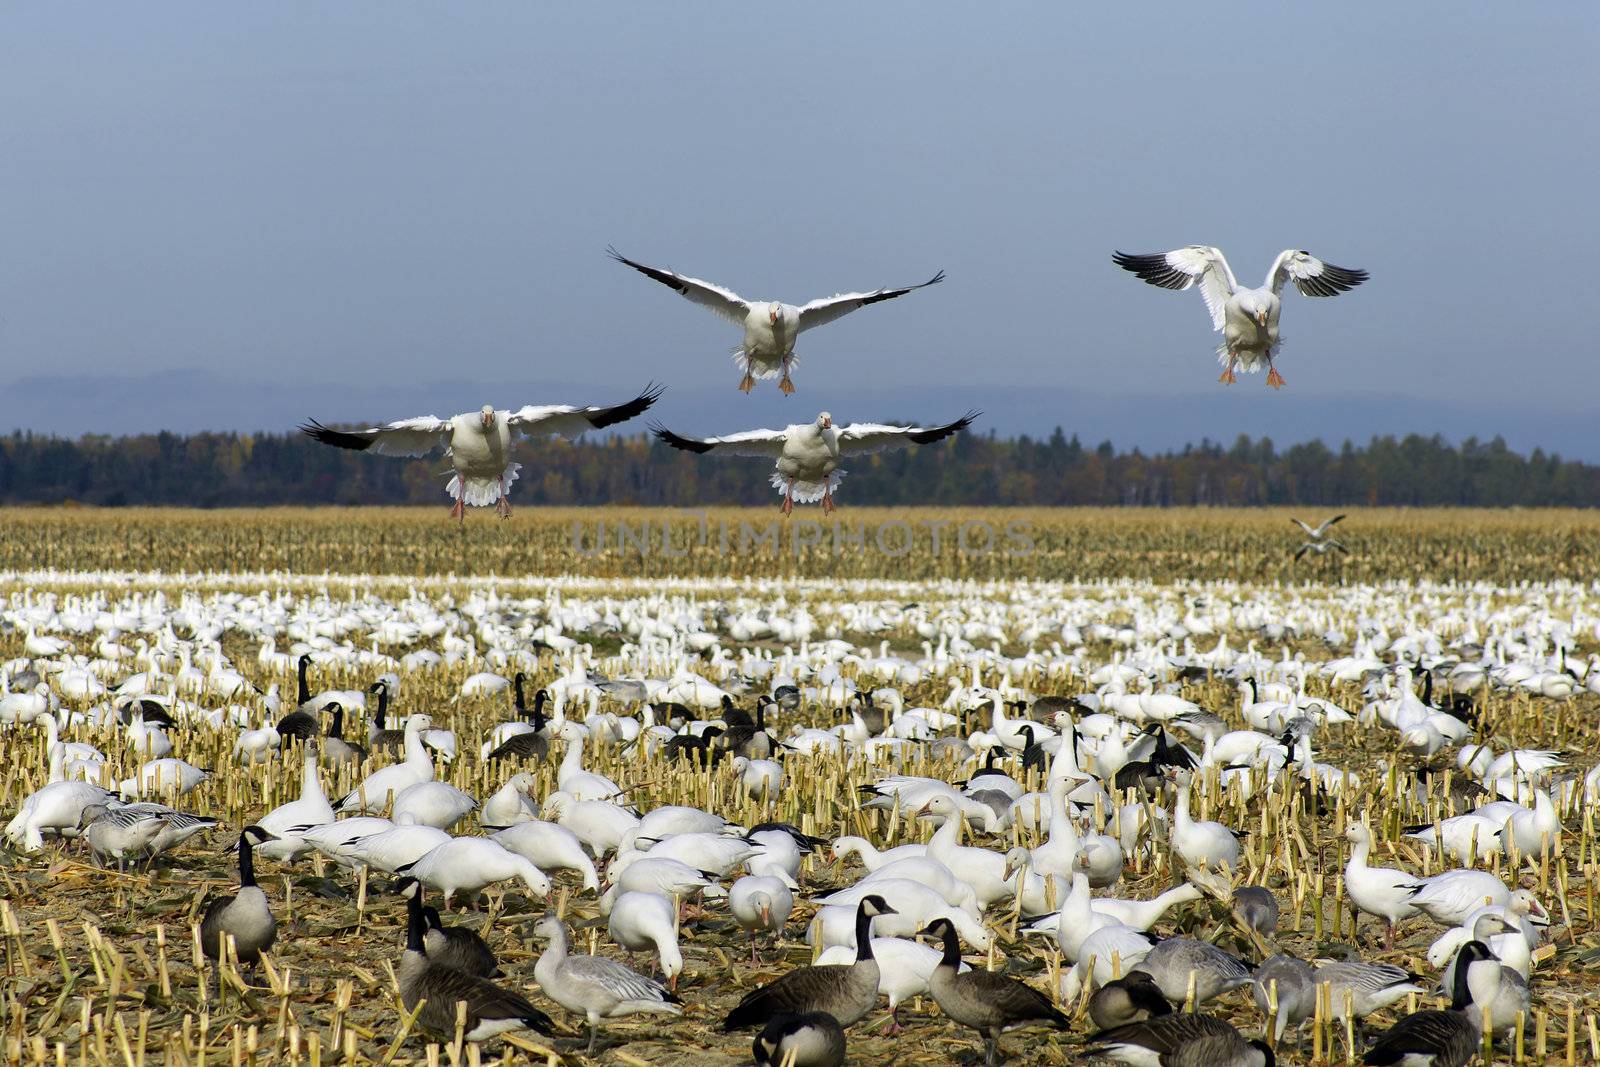 Snow geese landing among other snow and canadian geese feeding and resting in a cut corn field on their way south during fall migration in North america.